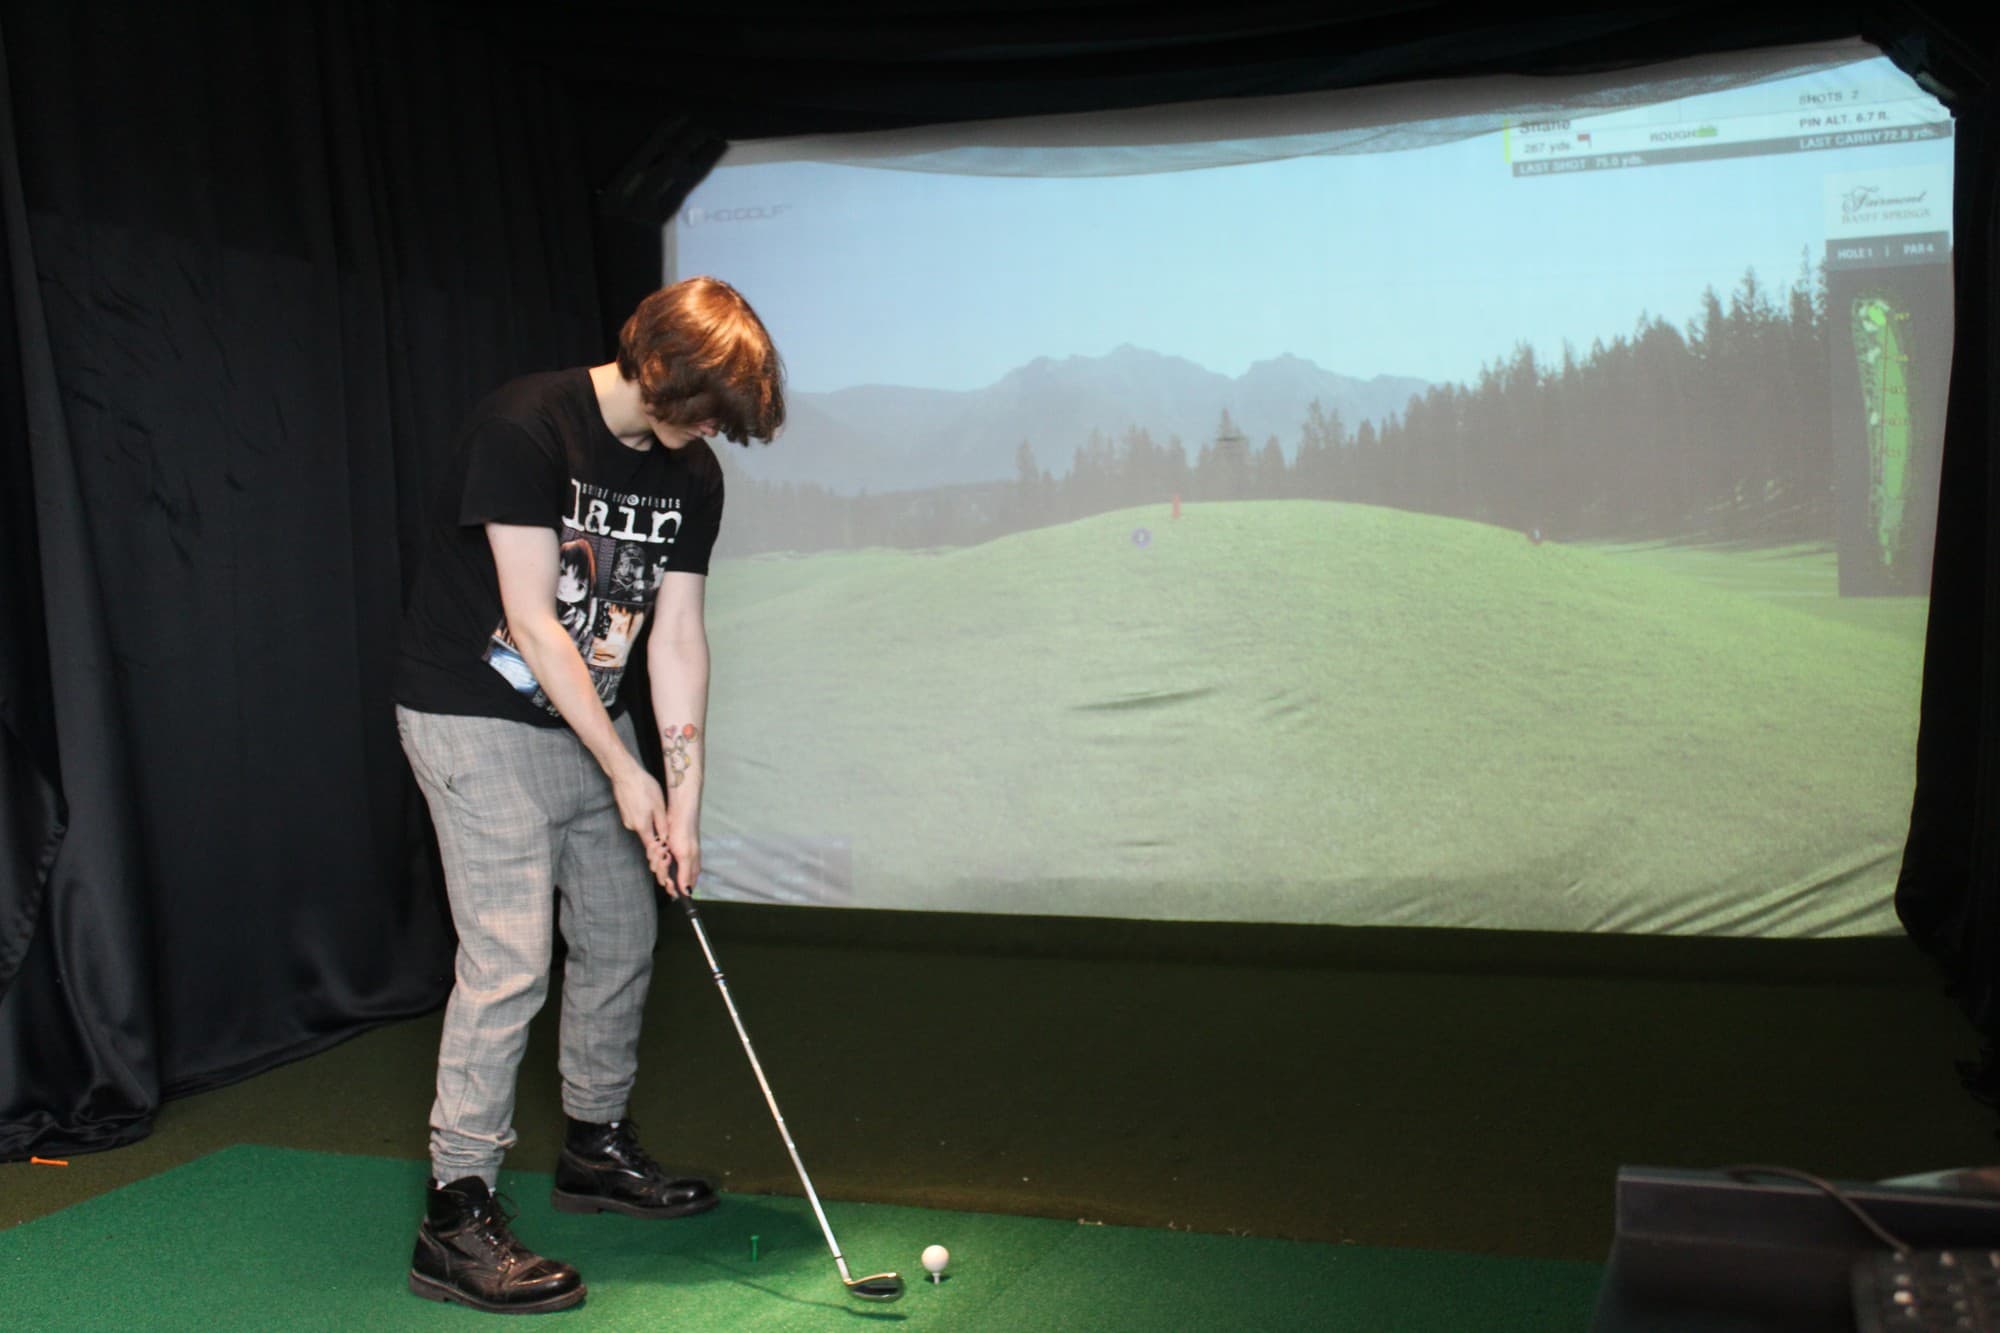 Playing golf at the free Wolves Den simulator